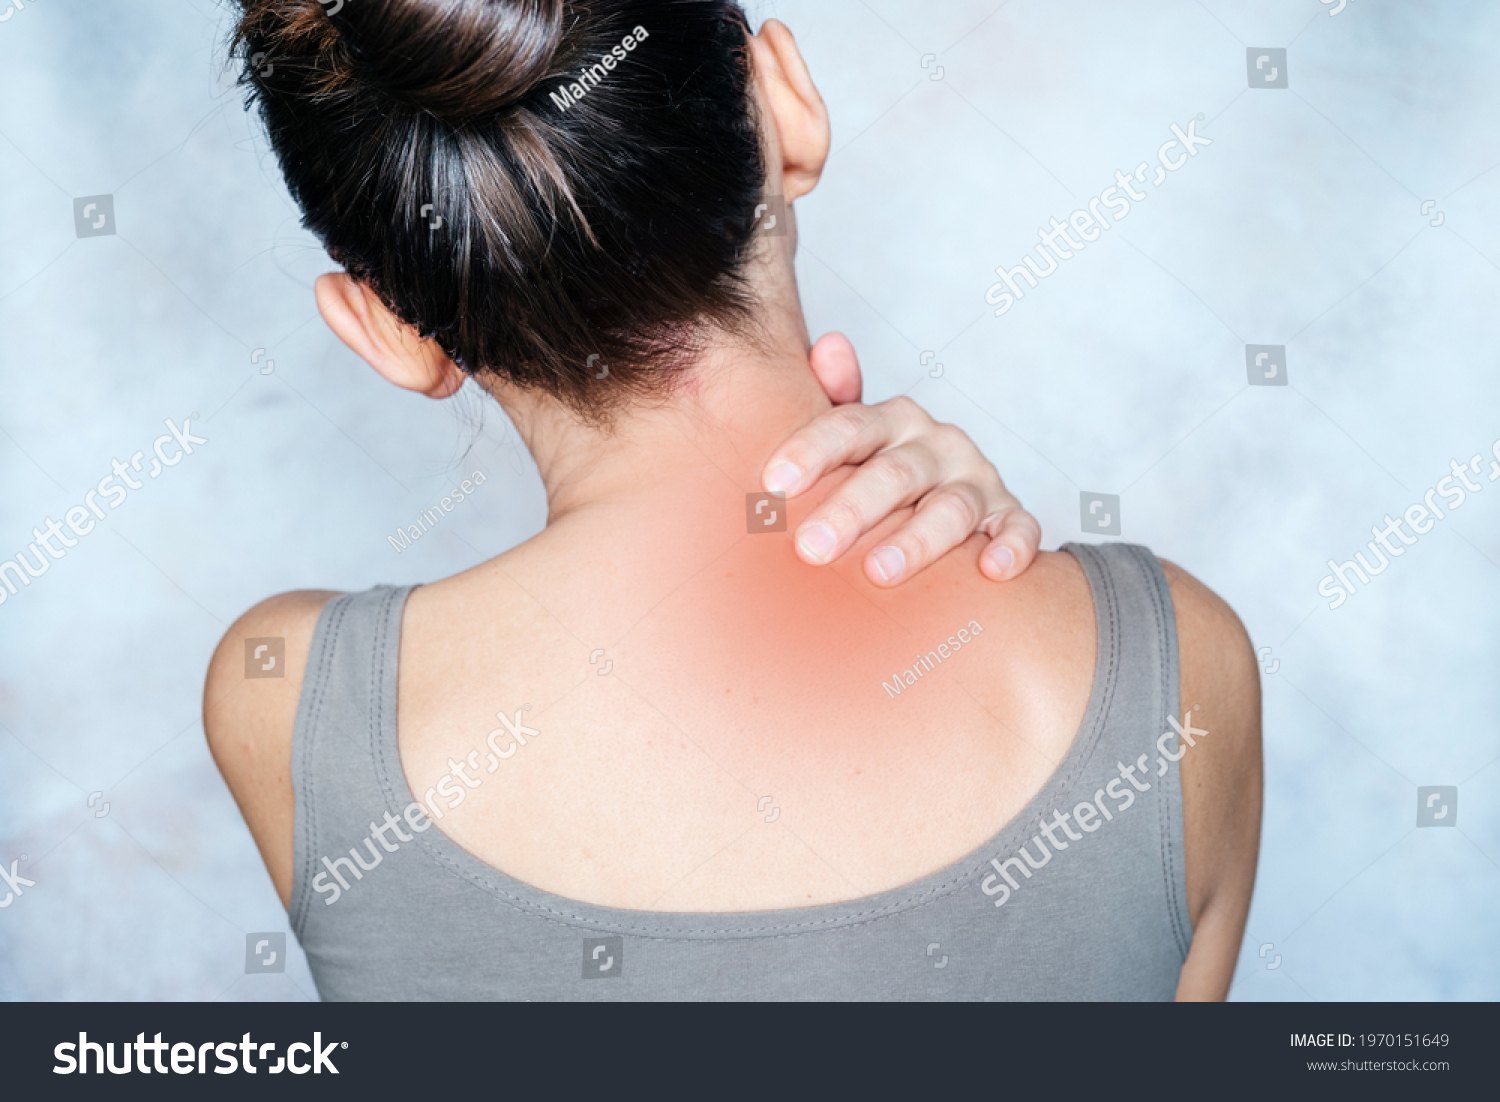 A woman massages her shoulder and neck pain points, trigger point massage, physiotherapy and massage concept #1970151649